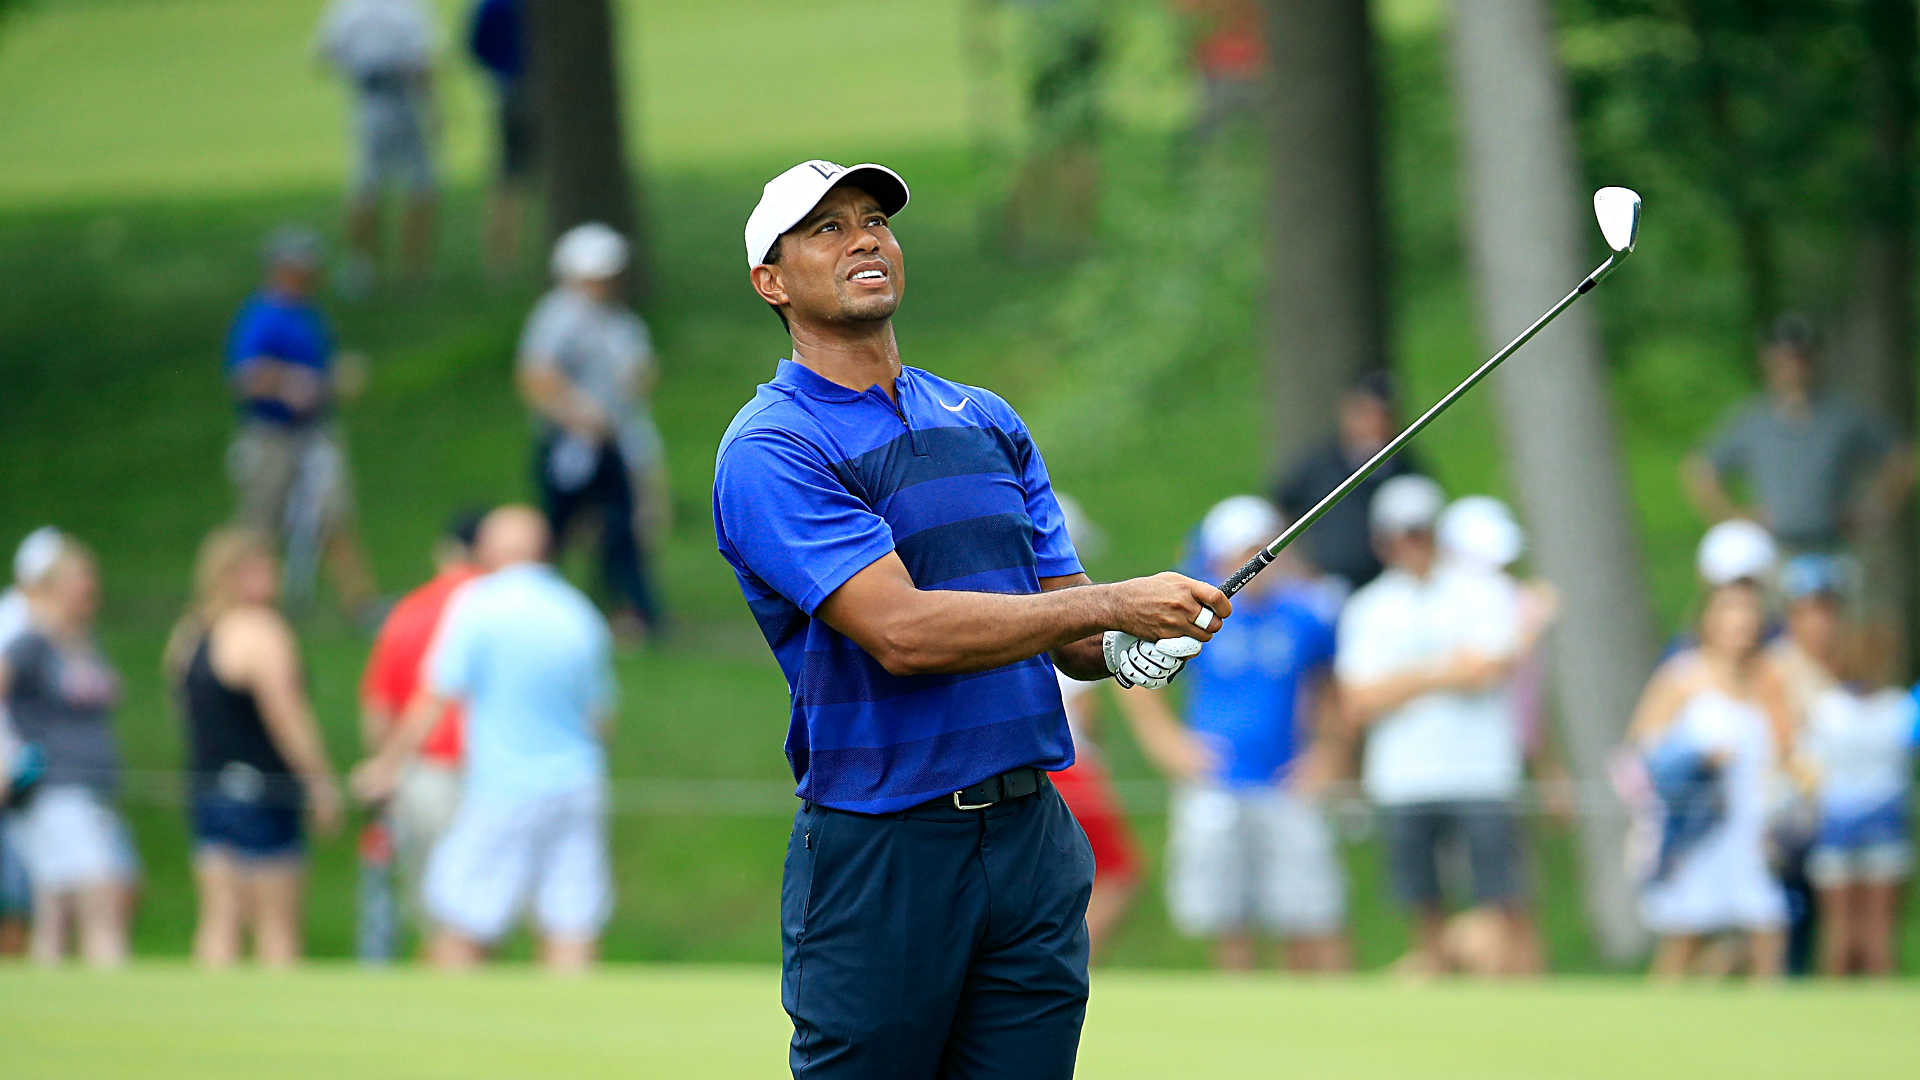 Tiger Woods score: Round 2 updates, leaderboard from Memorial Tournament | Golf ...1920 x 1080